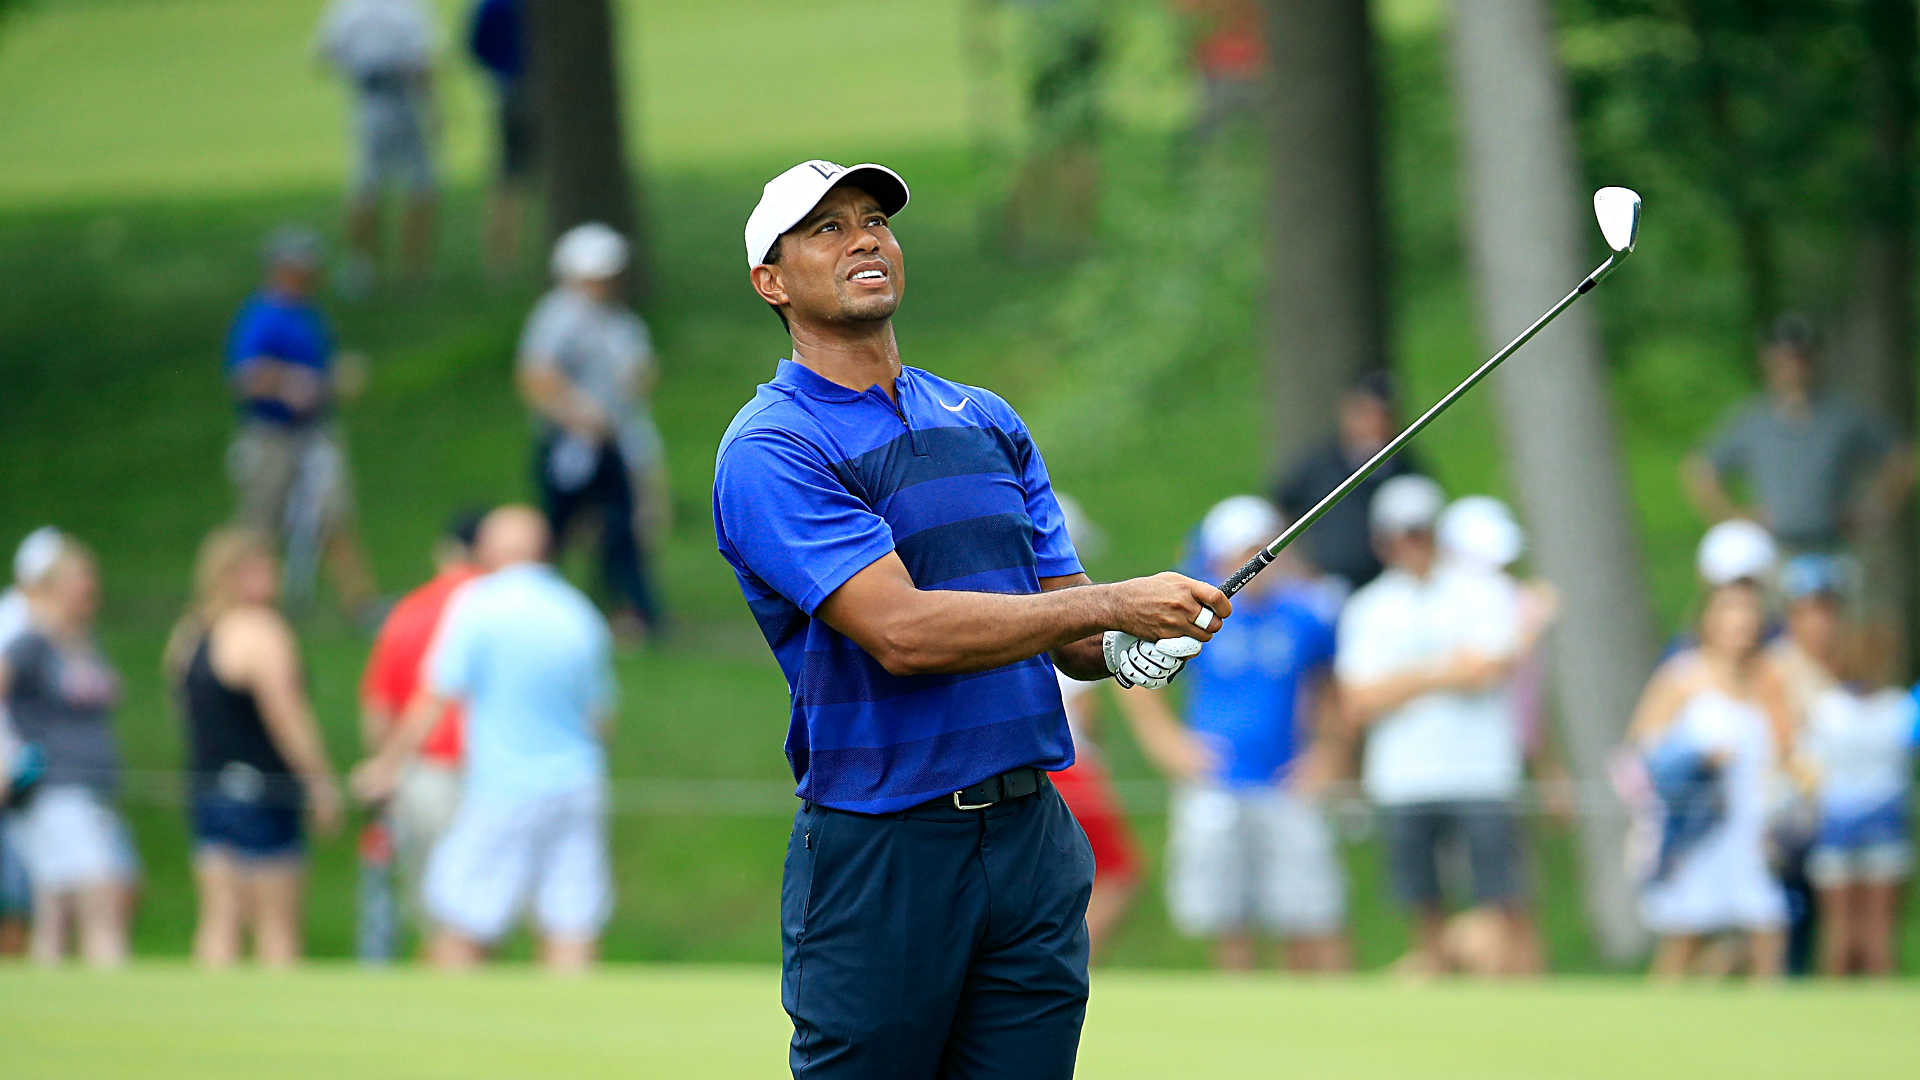 Tiger Woods score: Round 2 updates, leaderboard from Memorial Tournament | Golf ...1920 x 1080